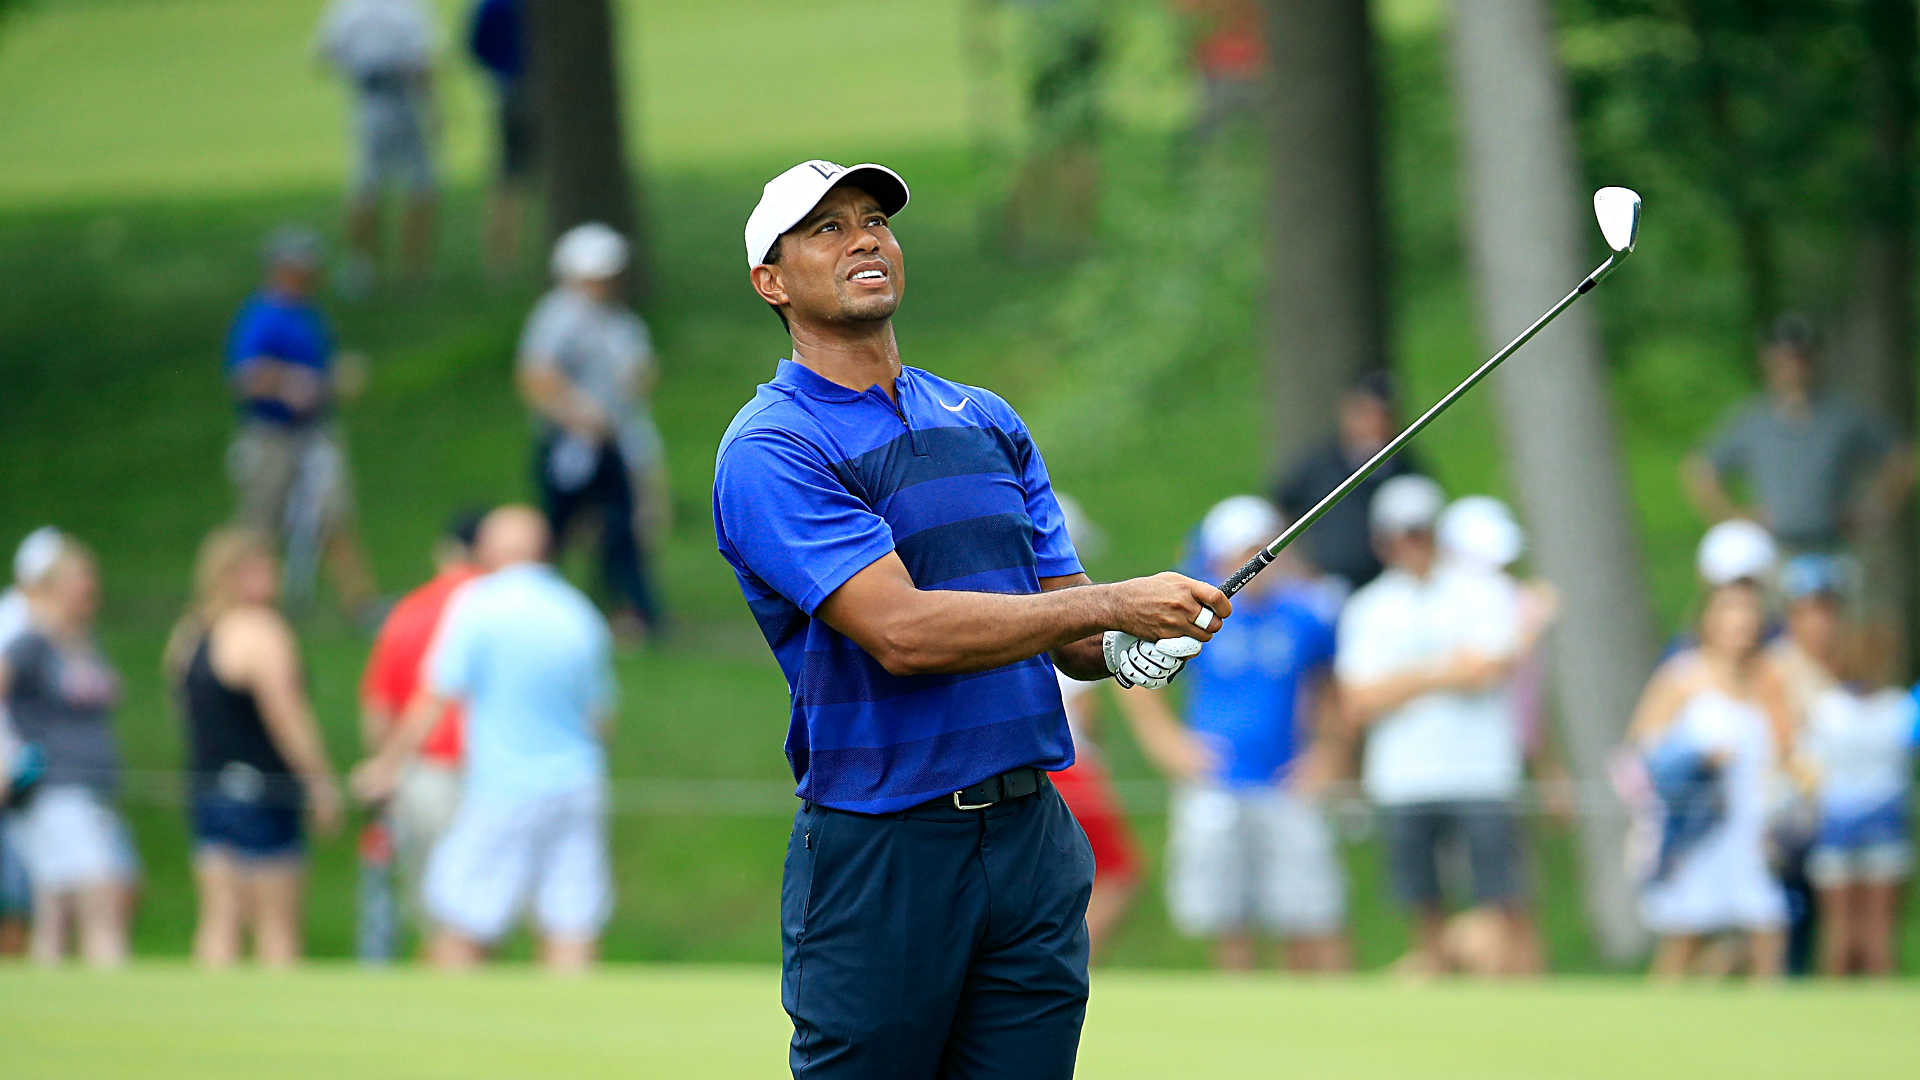 Tiger Woods score: Round 2 updates, leaderboard from Memorial Tournament | Golf ...1920 x 1080